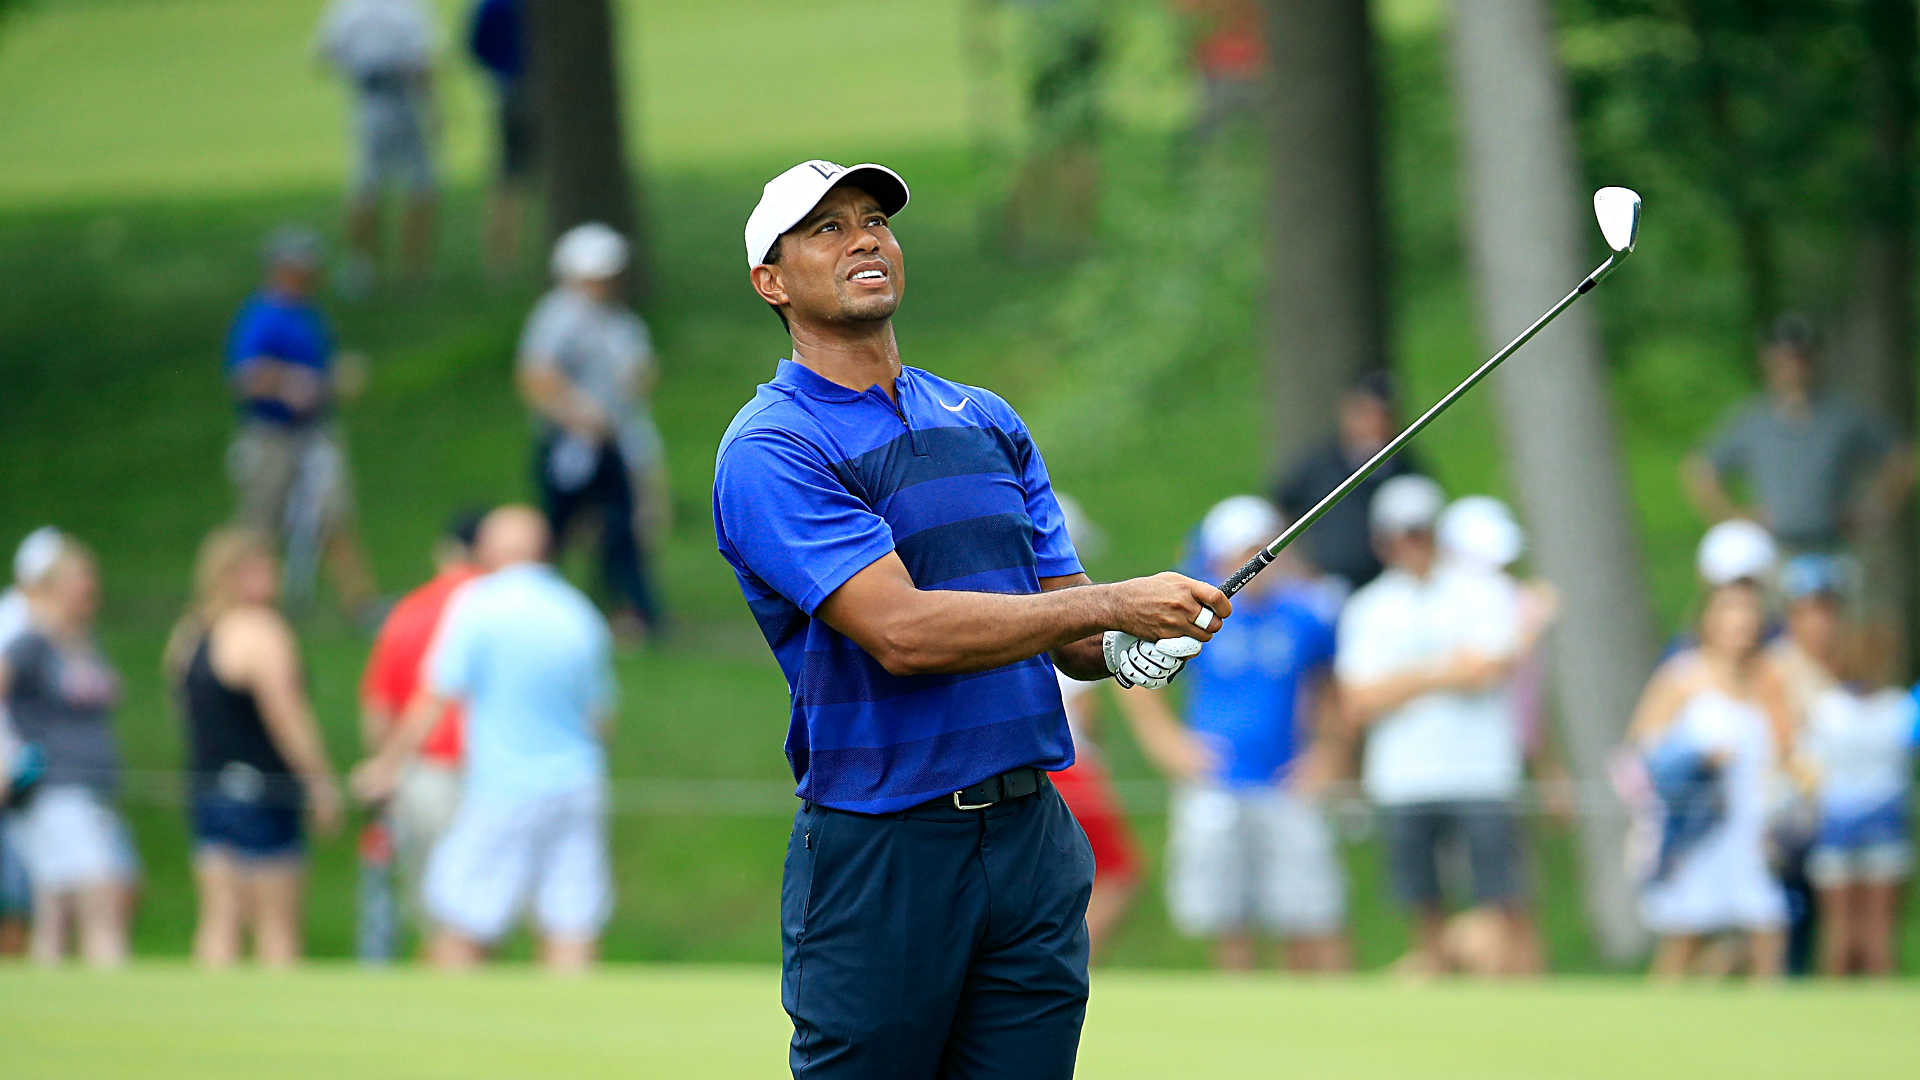 Tiger Woods score: Round 2 updates, leaderboard from Memorial Tournament | Golf ...1920 x 1080